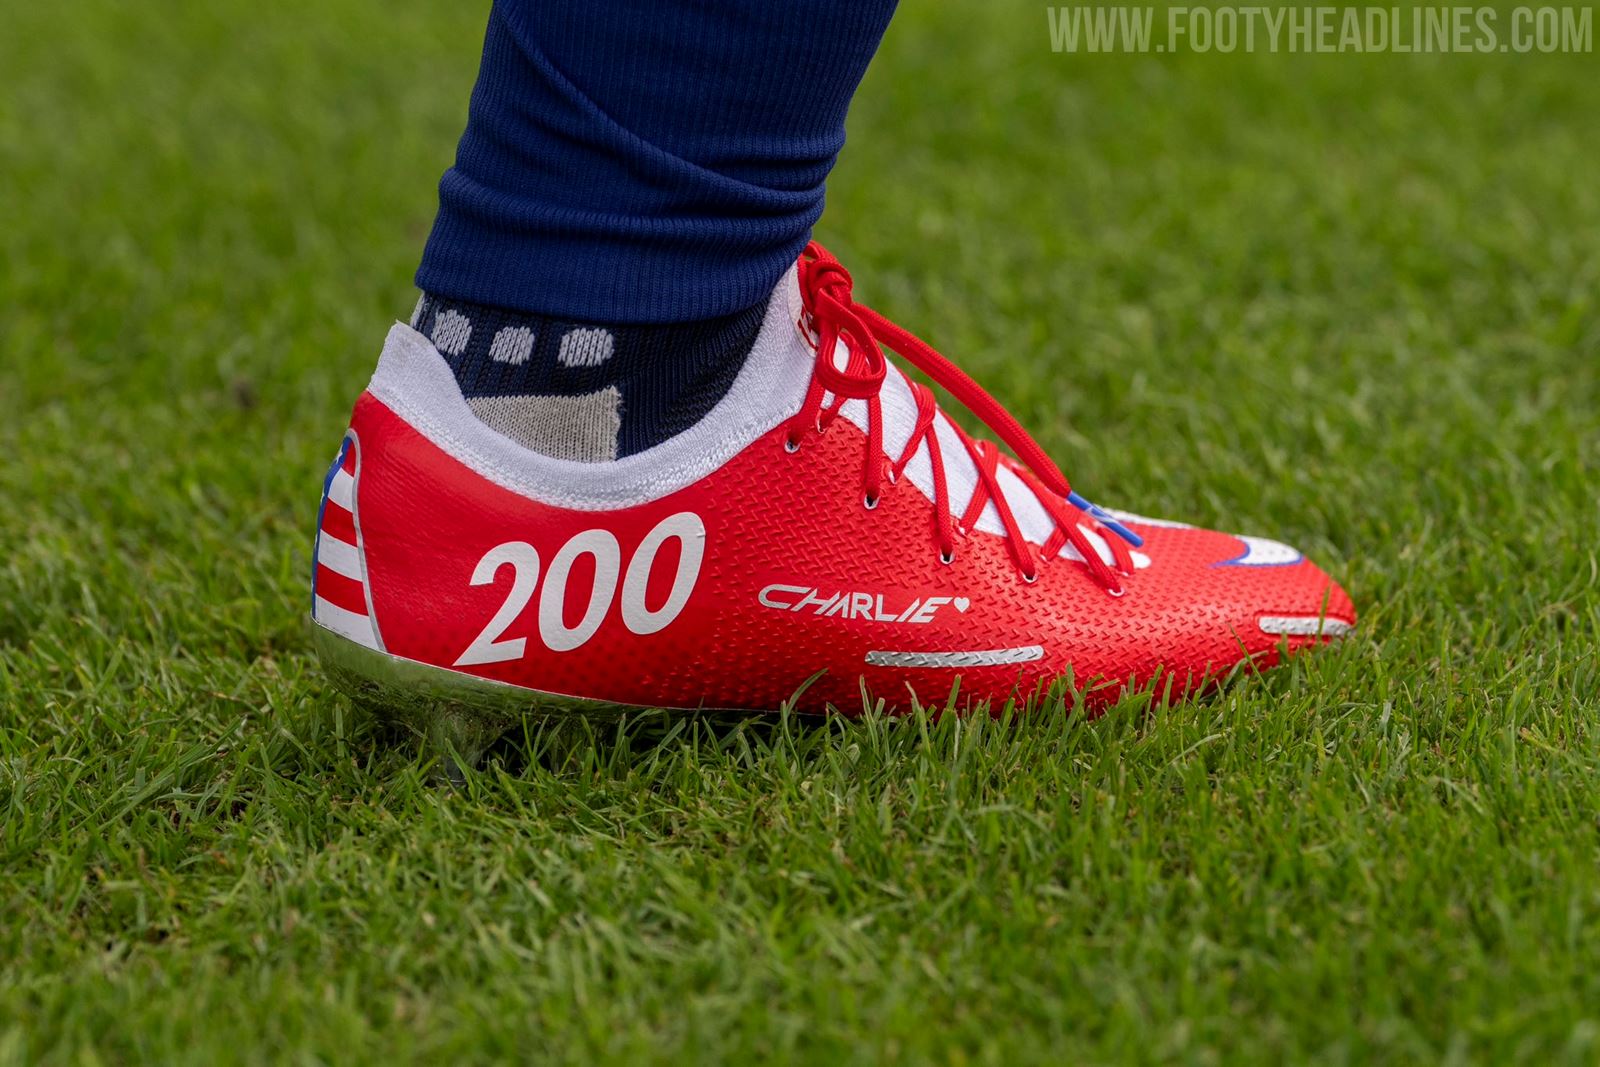 Special Nike Alex Morgan 200 Games Boots Revealed Footy